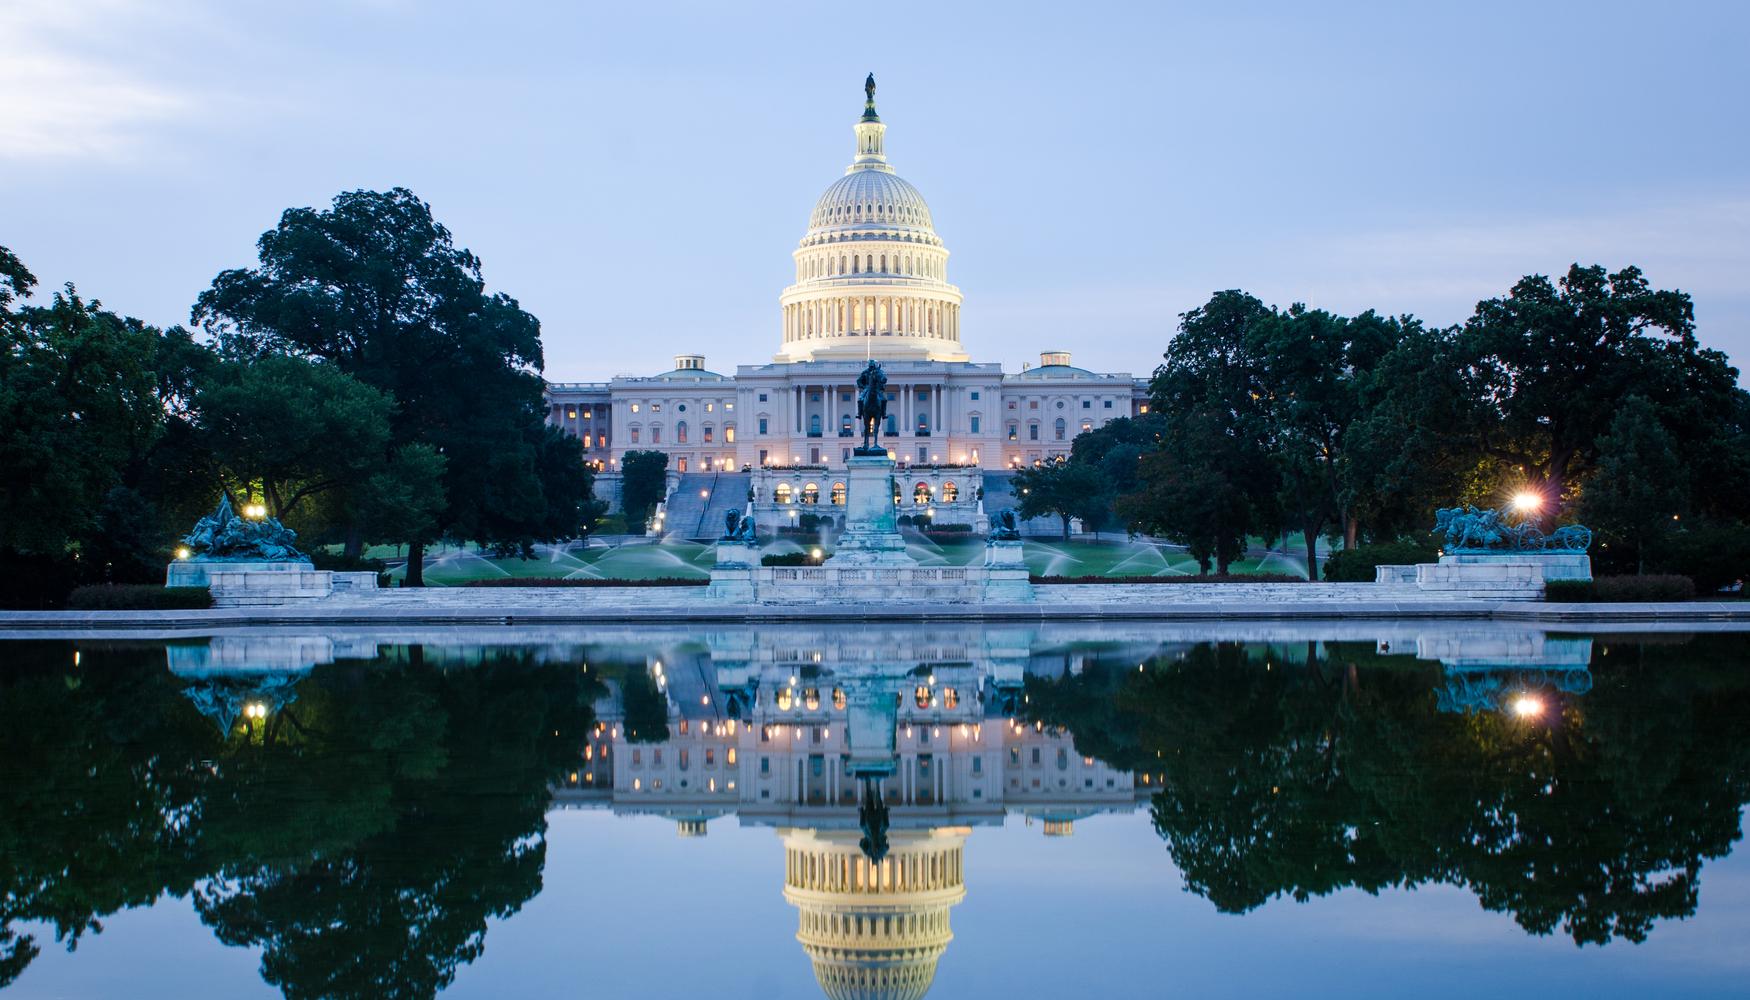 Holidays in Washington from £999 Search Flight+Hotel on KAYAK